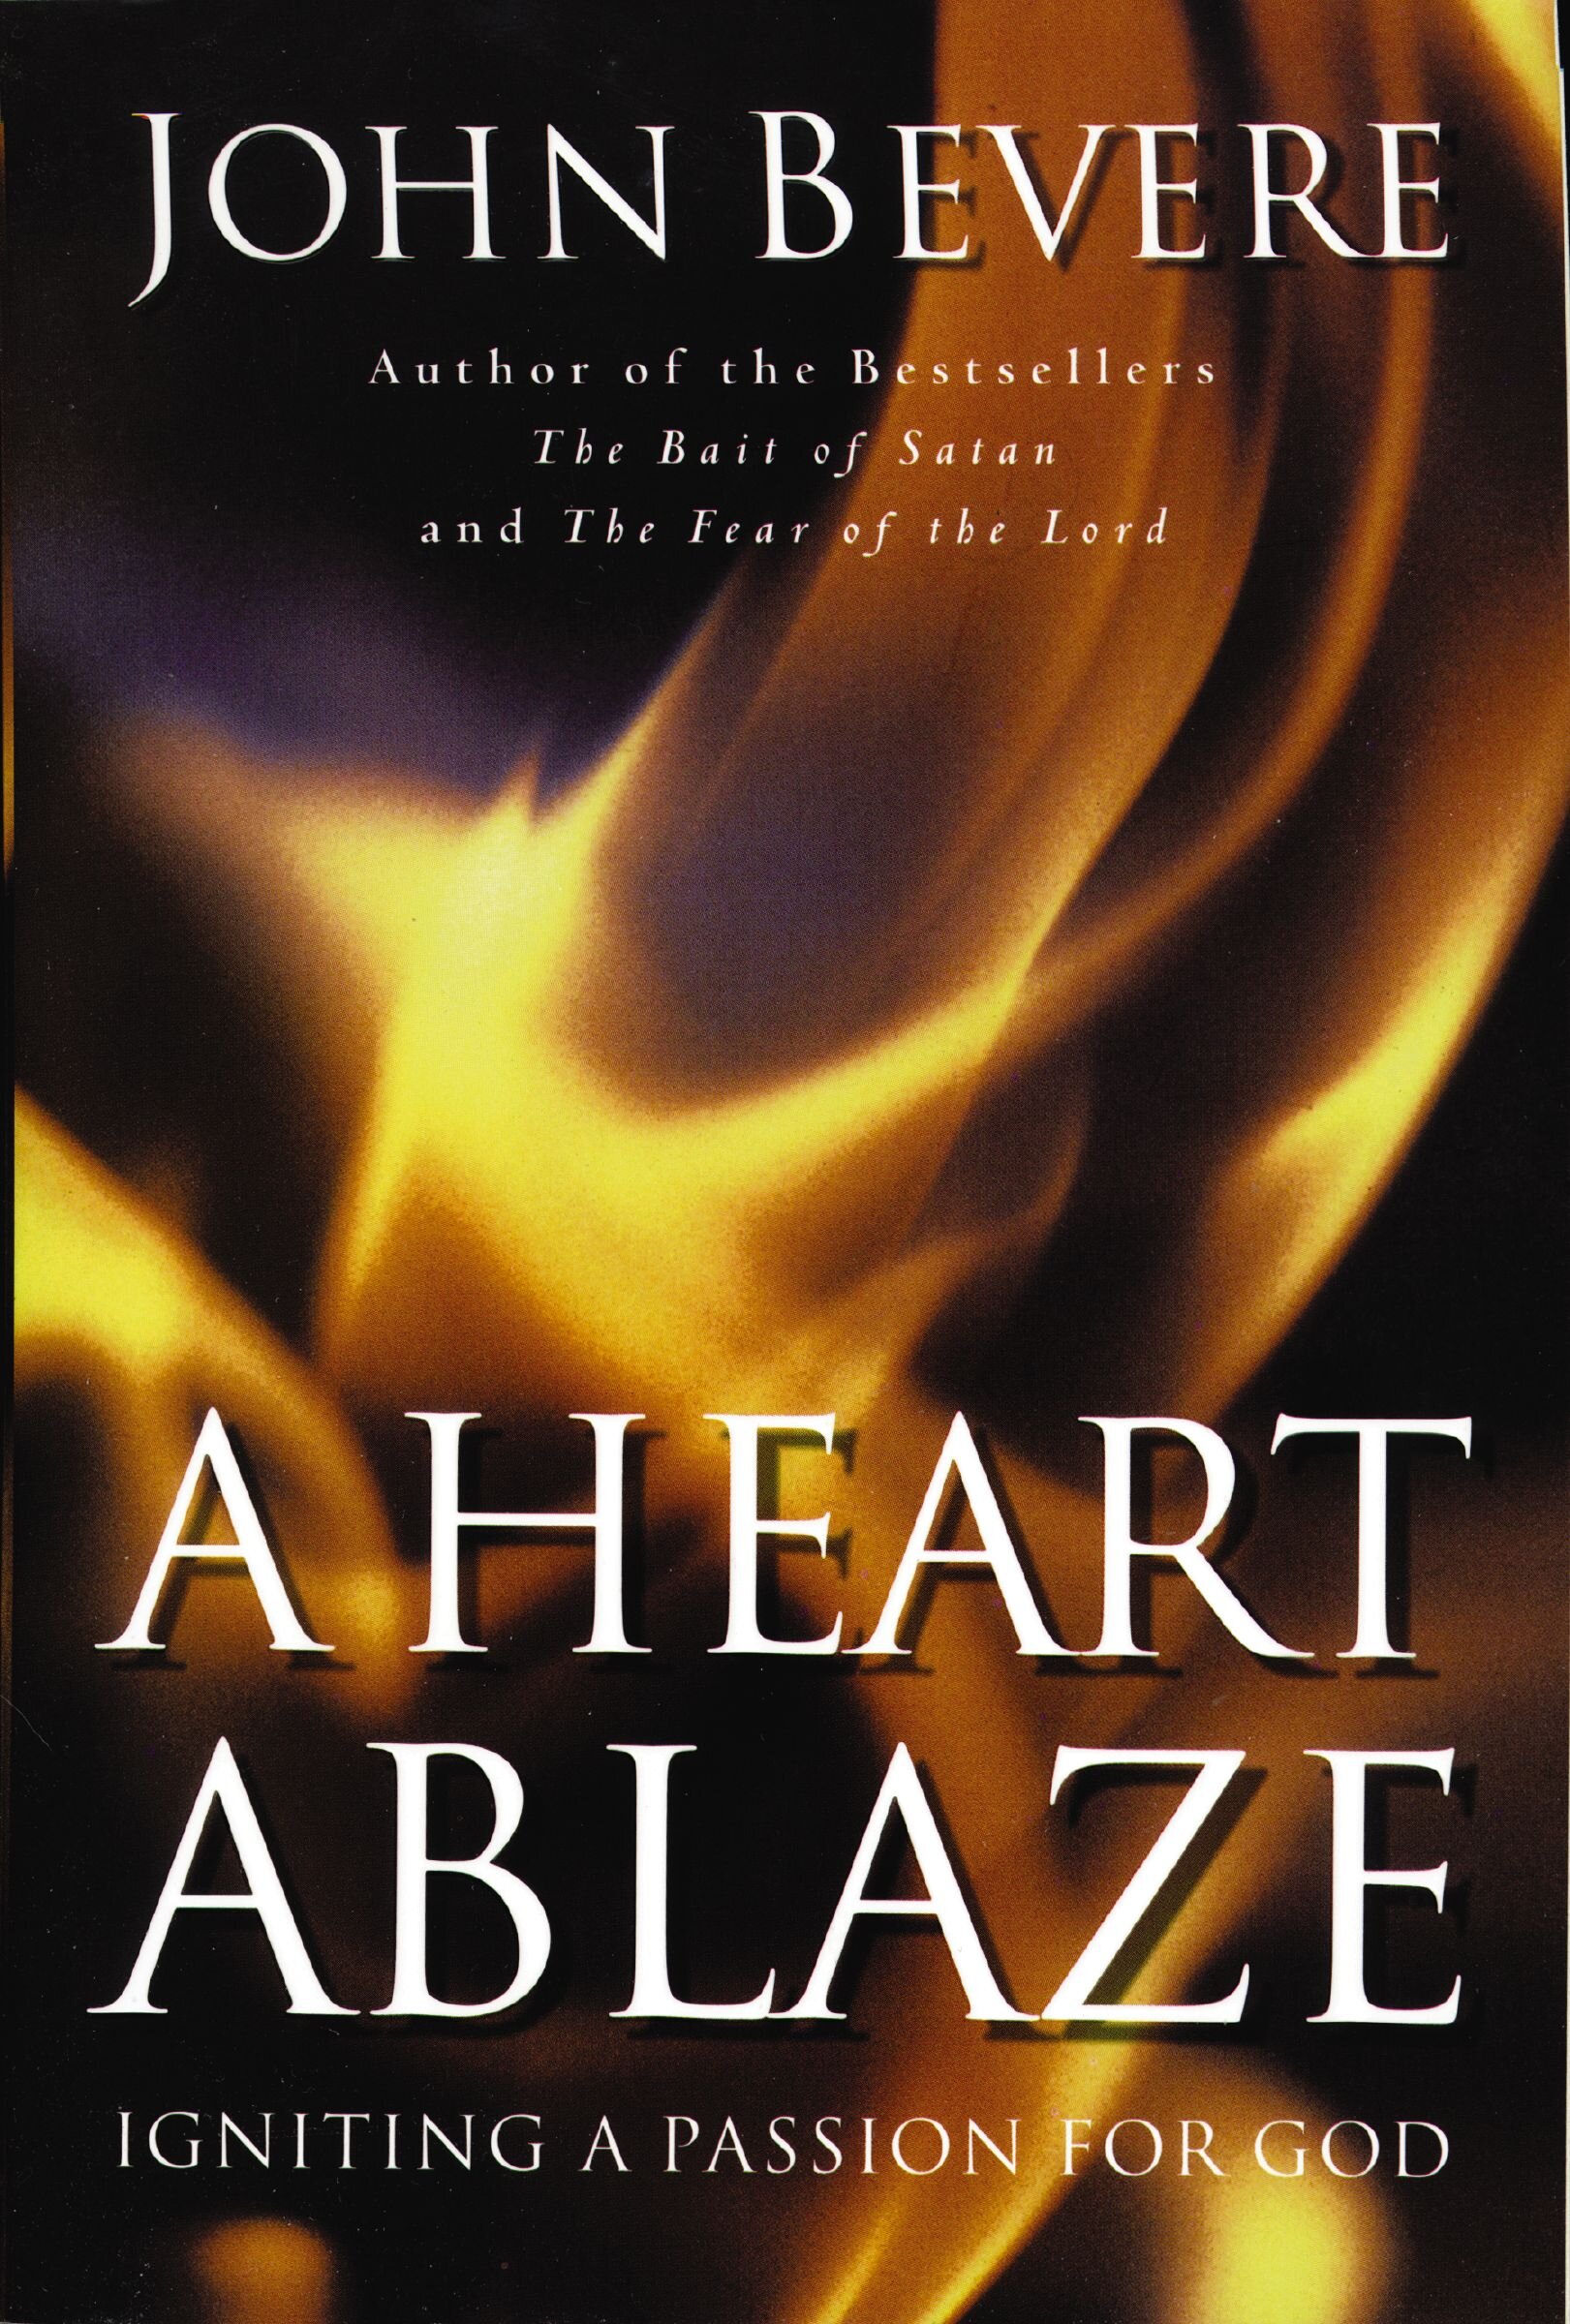 A Heart Ablaze: Igniting a Passion for God